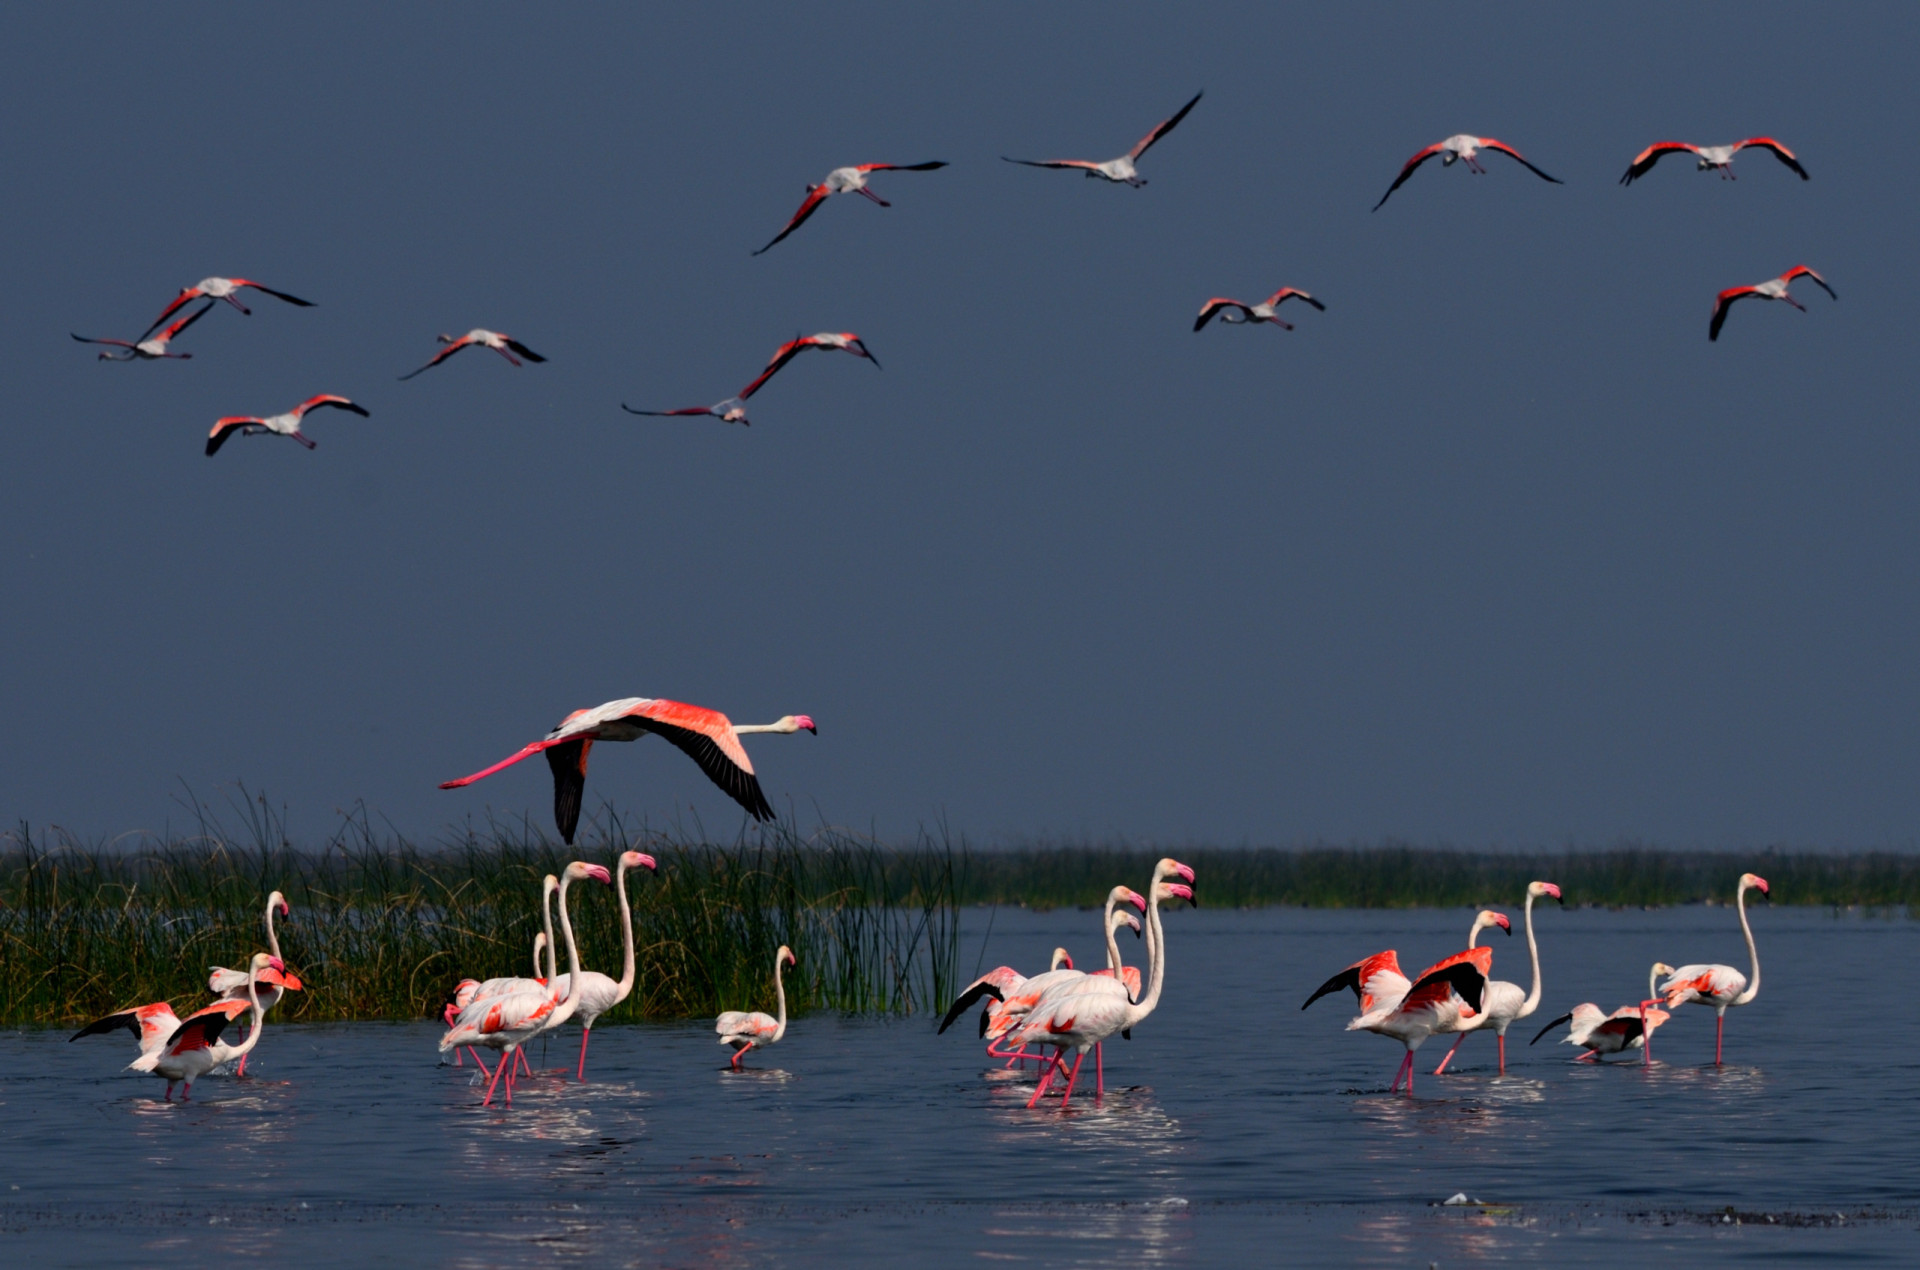 <p>The whole of Nalbana Island is a designated bird sanctuary and attracts ornithologists in their hundreds, who flock to Odisha to catch a glimpse of rare species like the spoon-billed sandpiper and Pallas's fish eagle.</p><p><a href="https://www.msn.com/en-my/community/channel/vid-7xx8mnucu55yw63we9va2gwr7uihbxwc68fxqp25x6tg4ftibpra?cvid=94631541bc0f4f89bfd59158d696ad7e">Follow us and access great exclusive content every day</a></p>